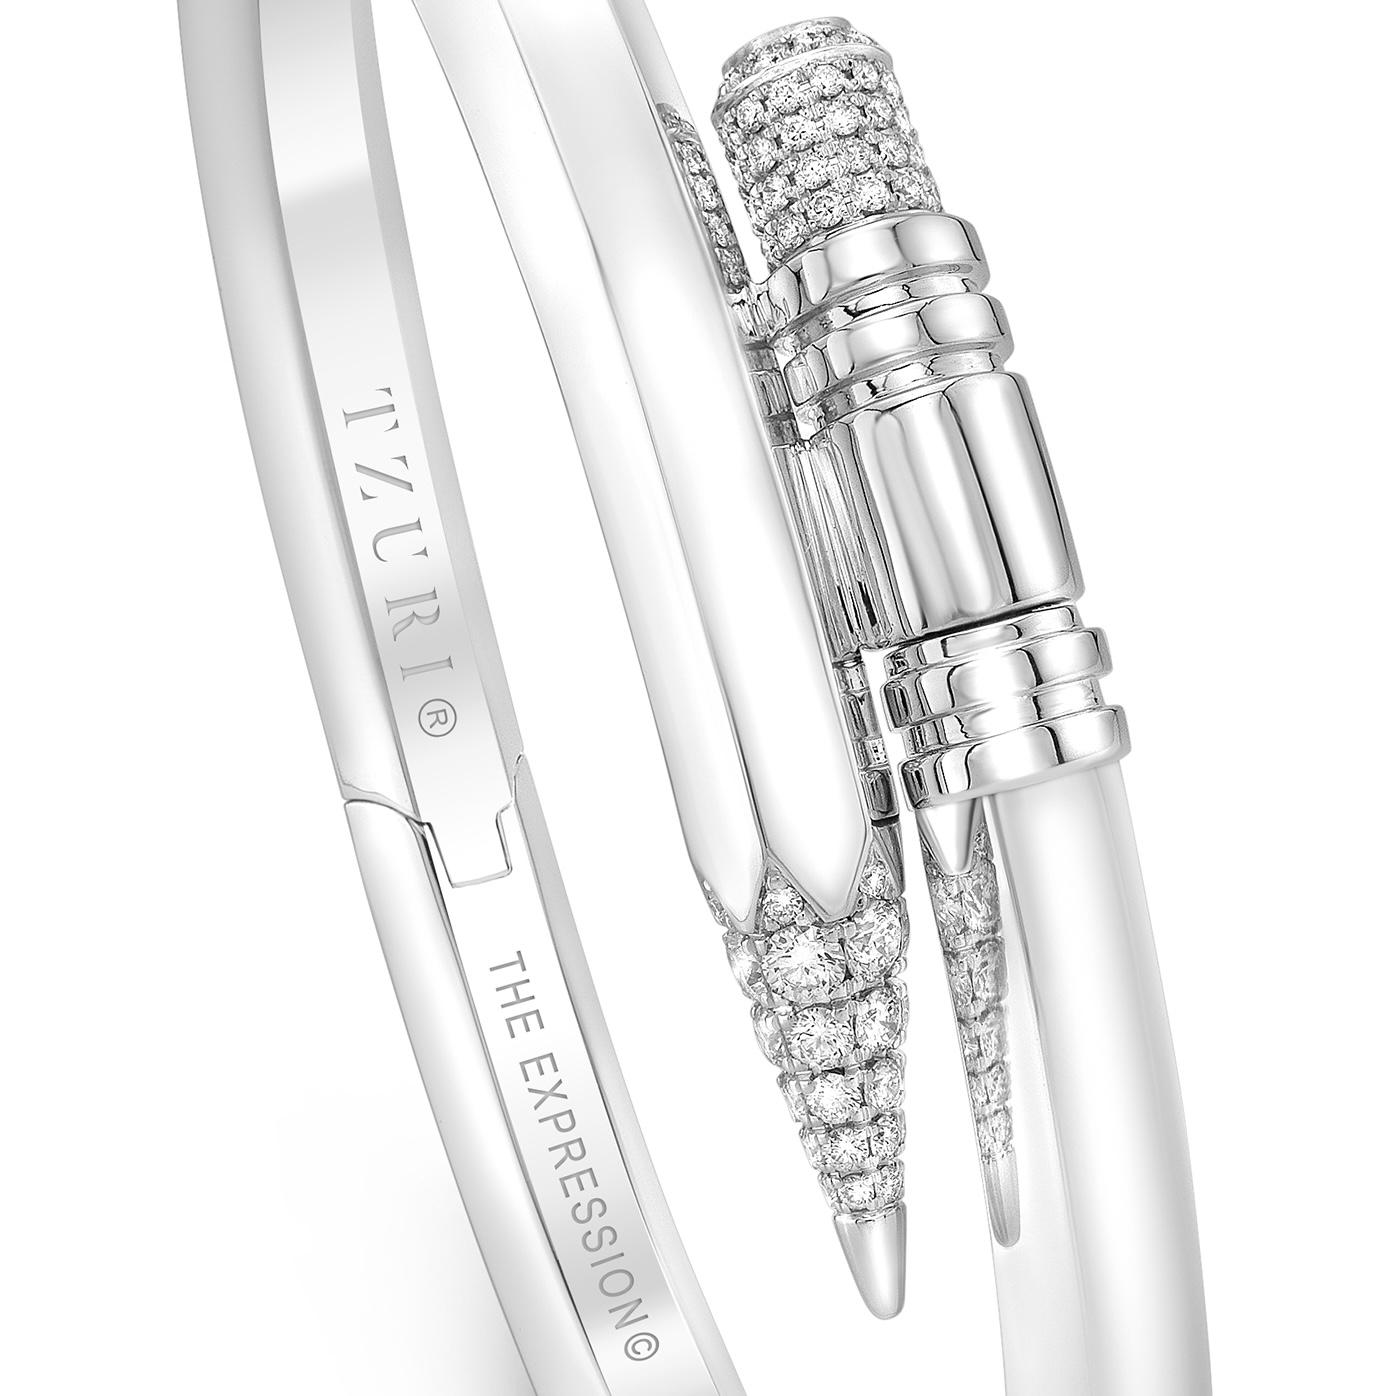 18K White Gold Medium Expression Bracelet

5.5 mm Gauge Thickness

Weight: 0.88 ct (approx.)

Color: F-G
Clarity: VS+

Bracelets are produced in limited editions of 500 units, per design, annually. They are engraved with the serial number and